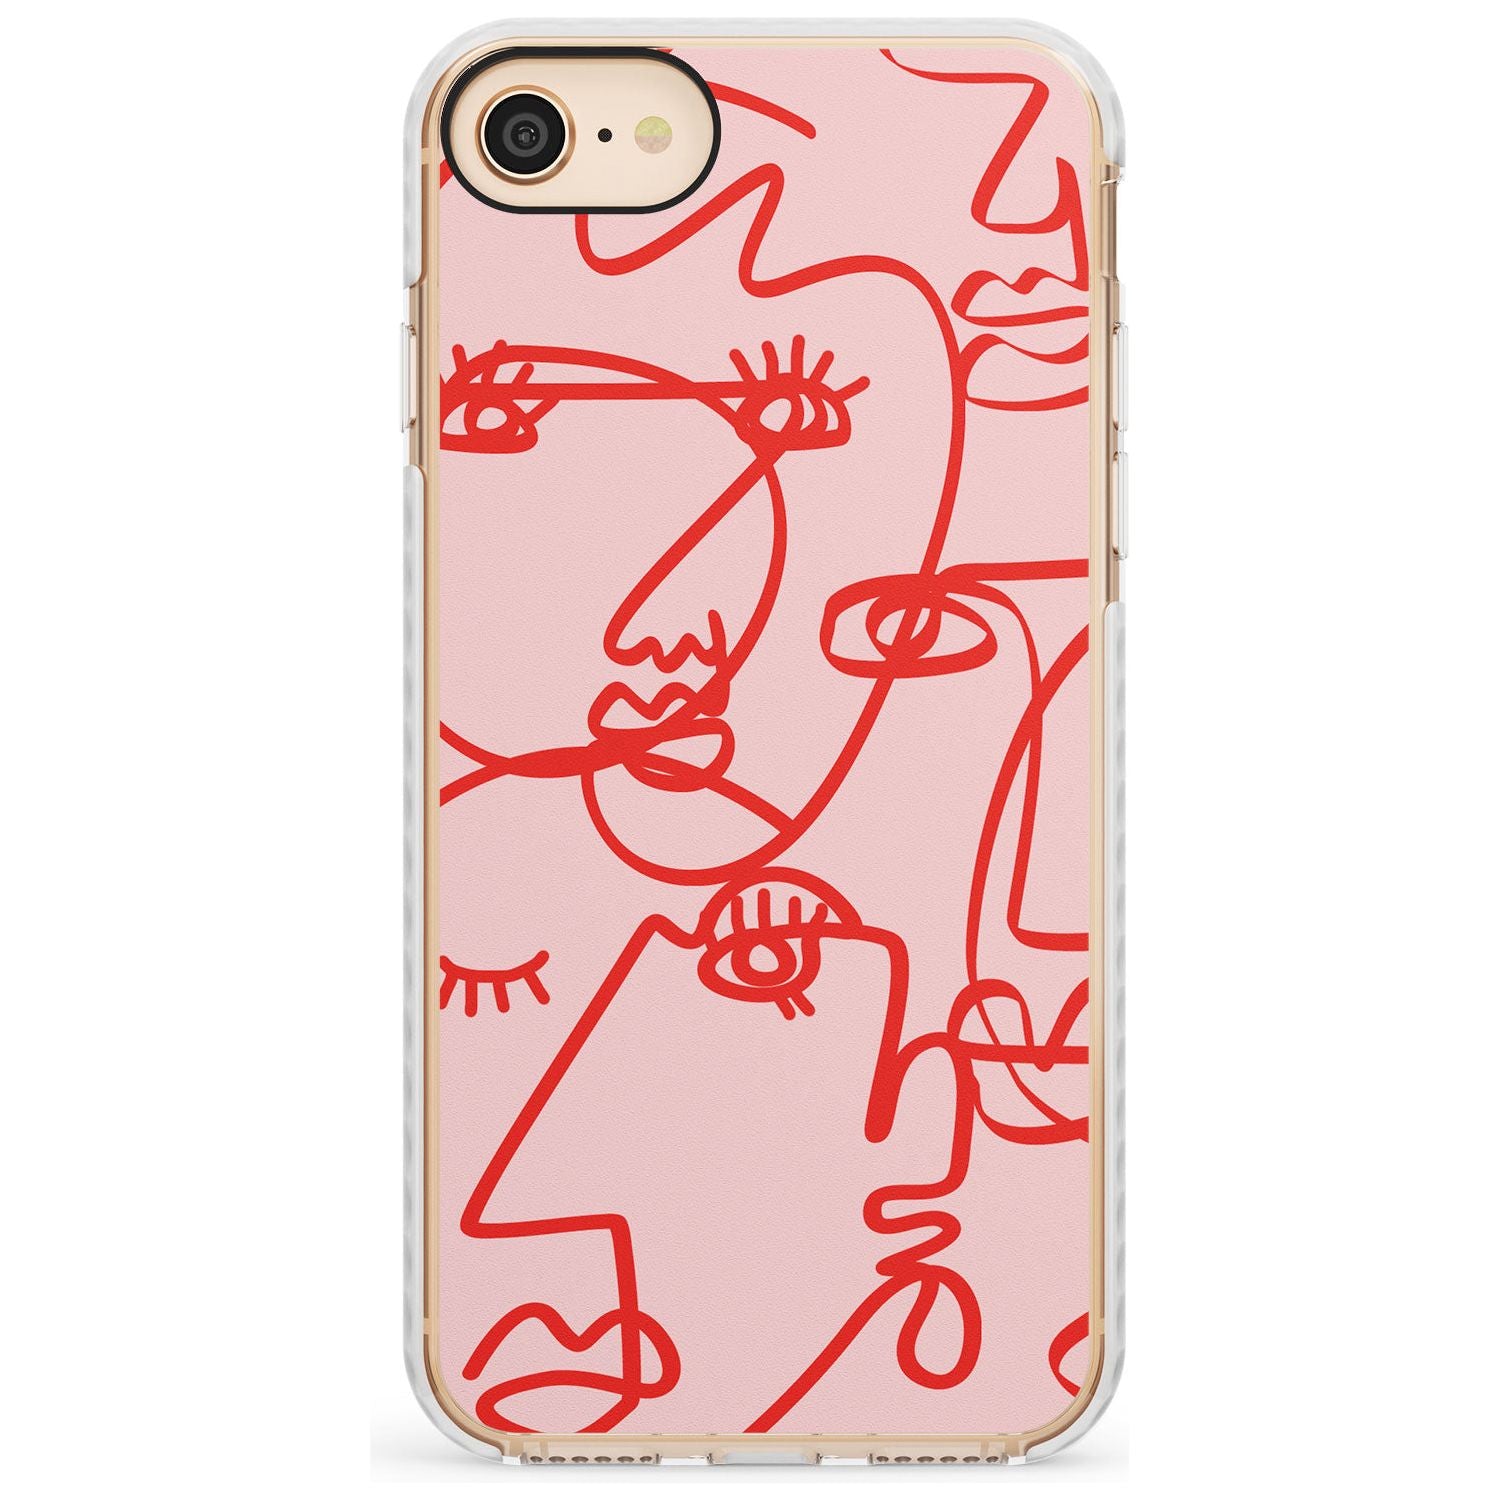 Continuous Line Faces: Red on Pink Slim TPU Phone Case for iPhone SE 8 7 Plus